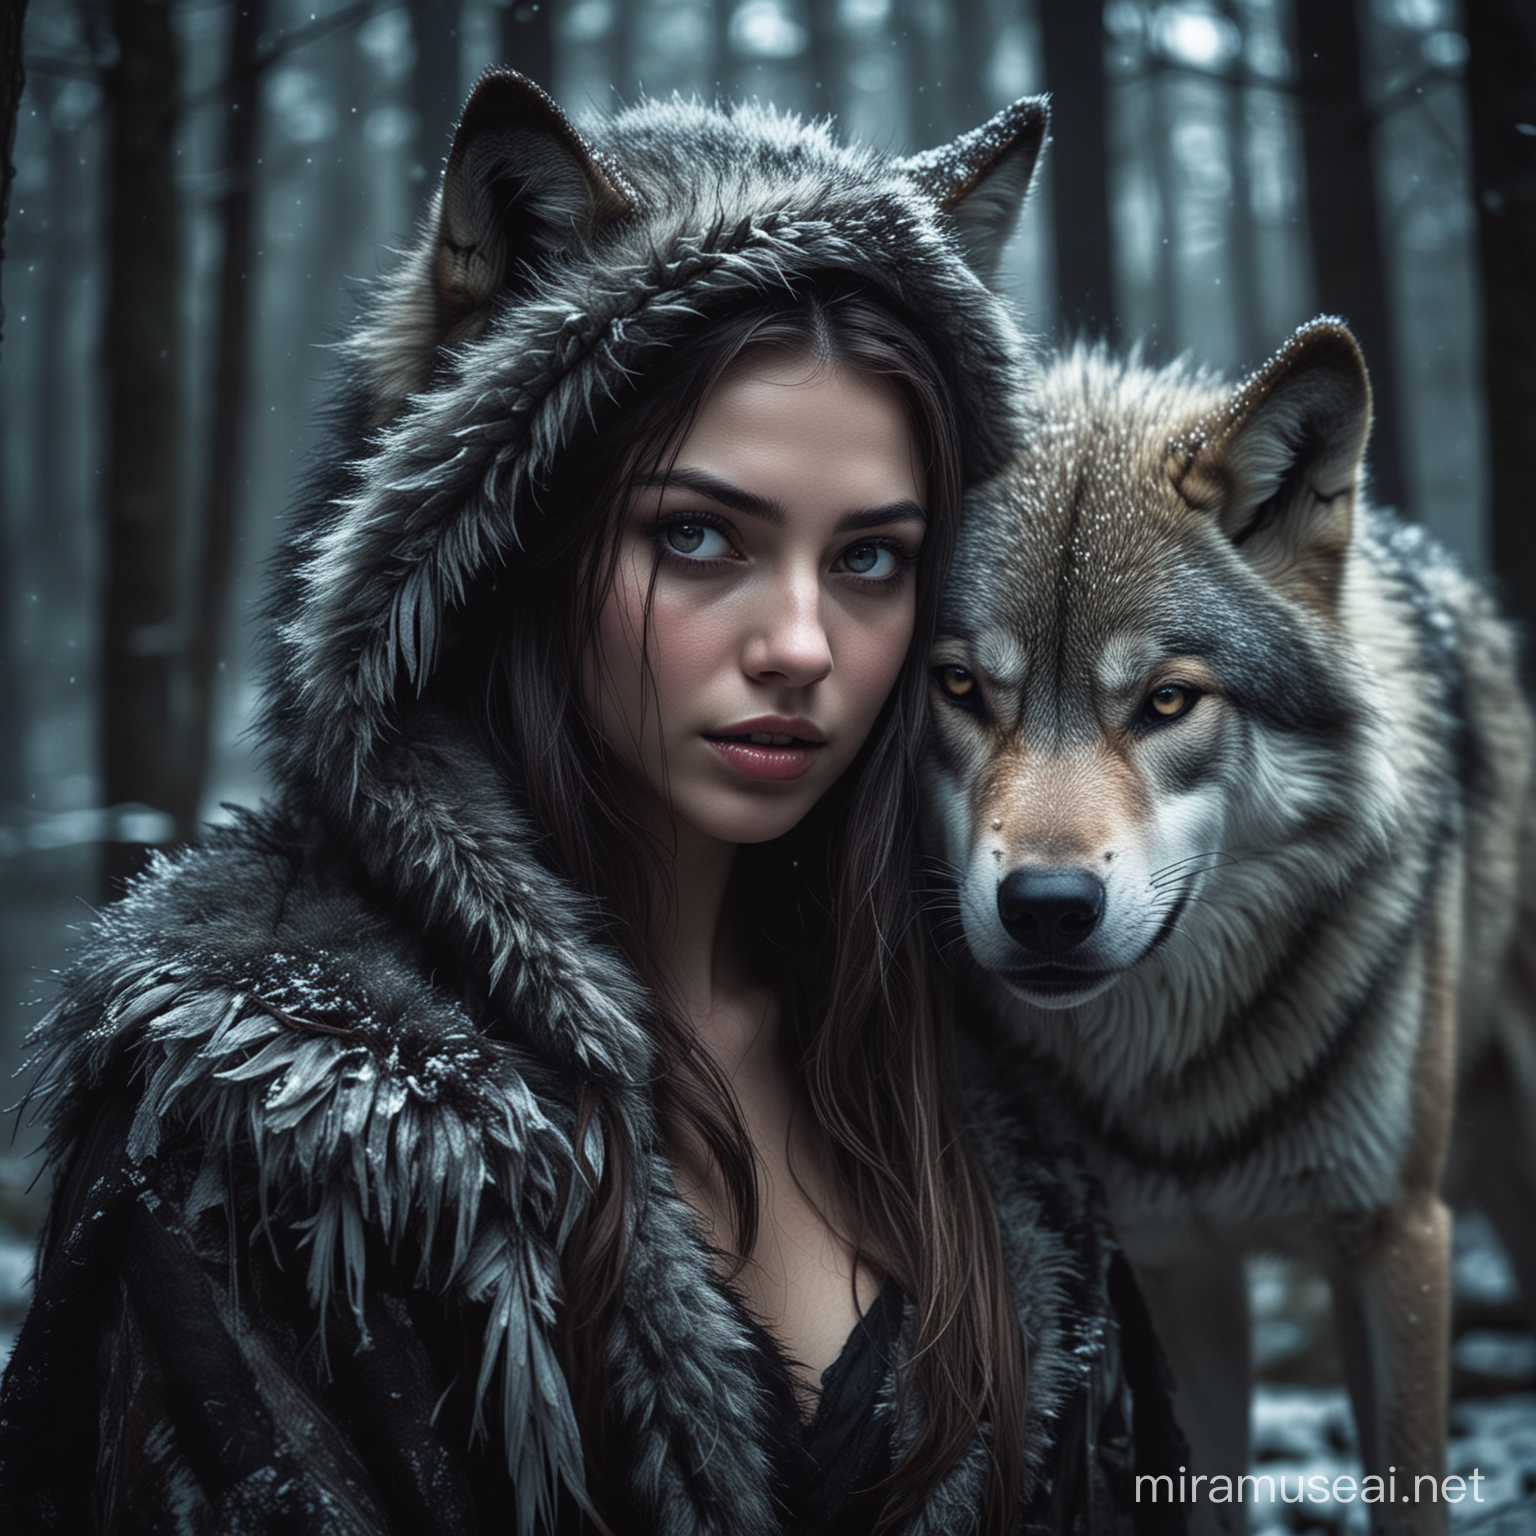 A fantasy girl, a wolf just front her face, in the dark cold forest